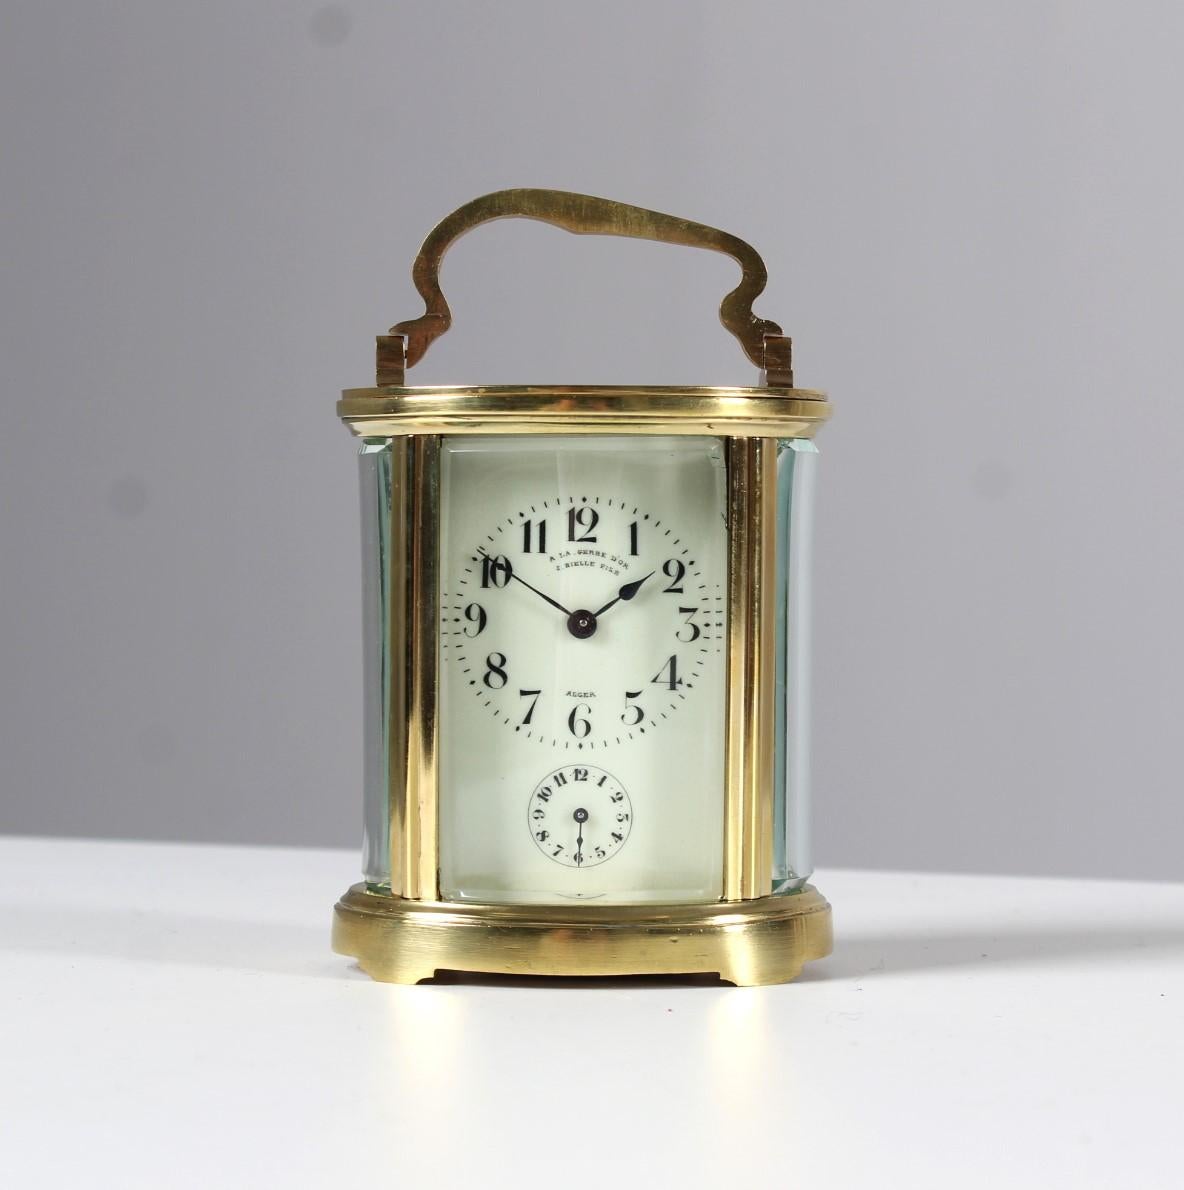 Antique travelling clock with alarm function from the late 19th century.
Measures: H x W x D: 12 (with handle 15) x 9.5 x 7 cm.

Oval brass case, glazed on all sides. Echappement visible from above.
Front enamel dial with black Arabic numerals